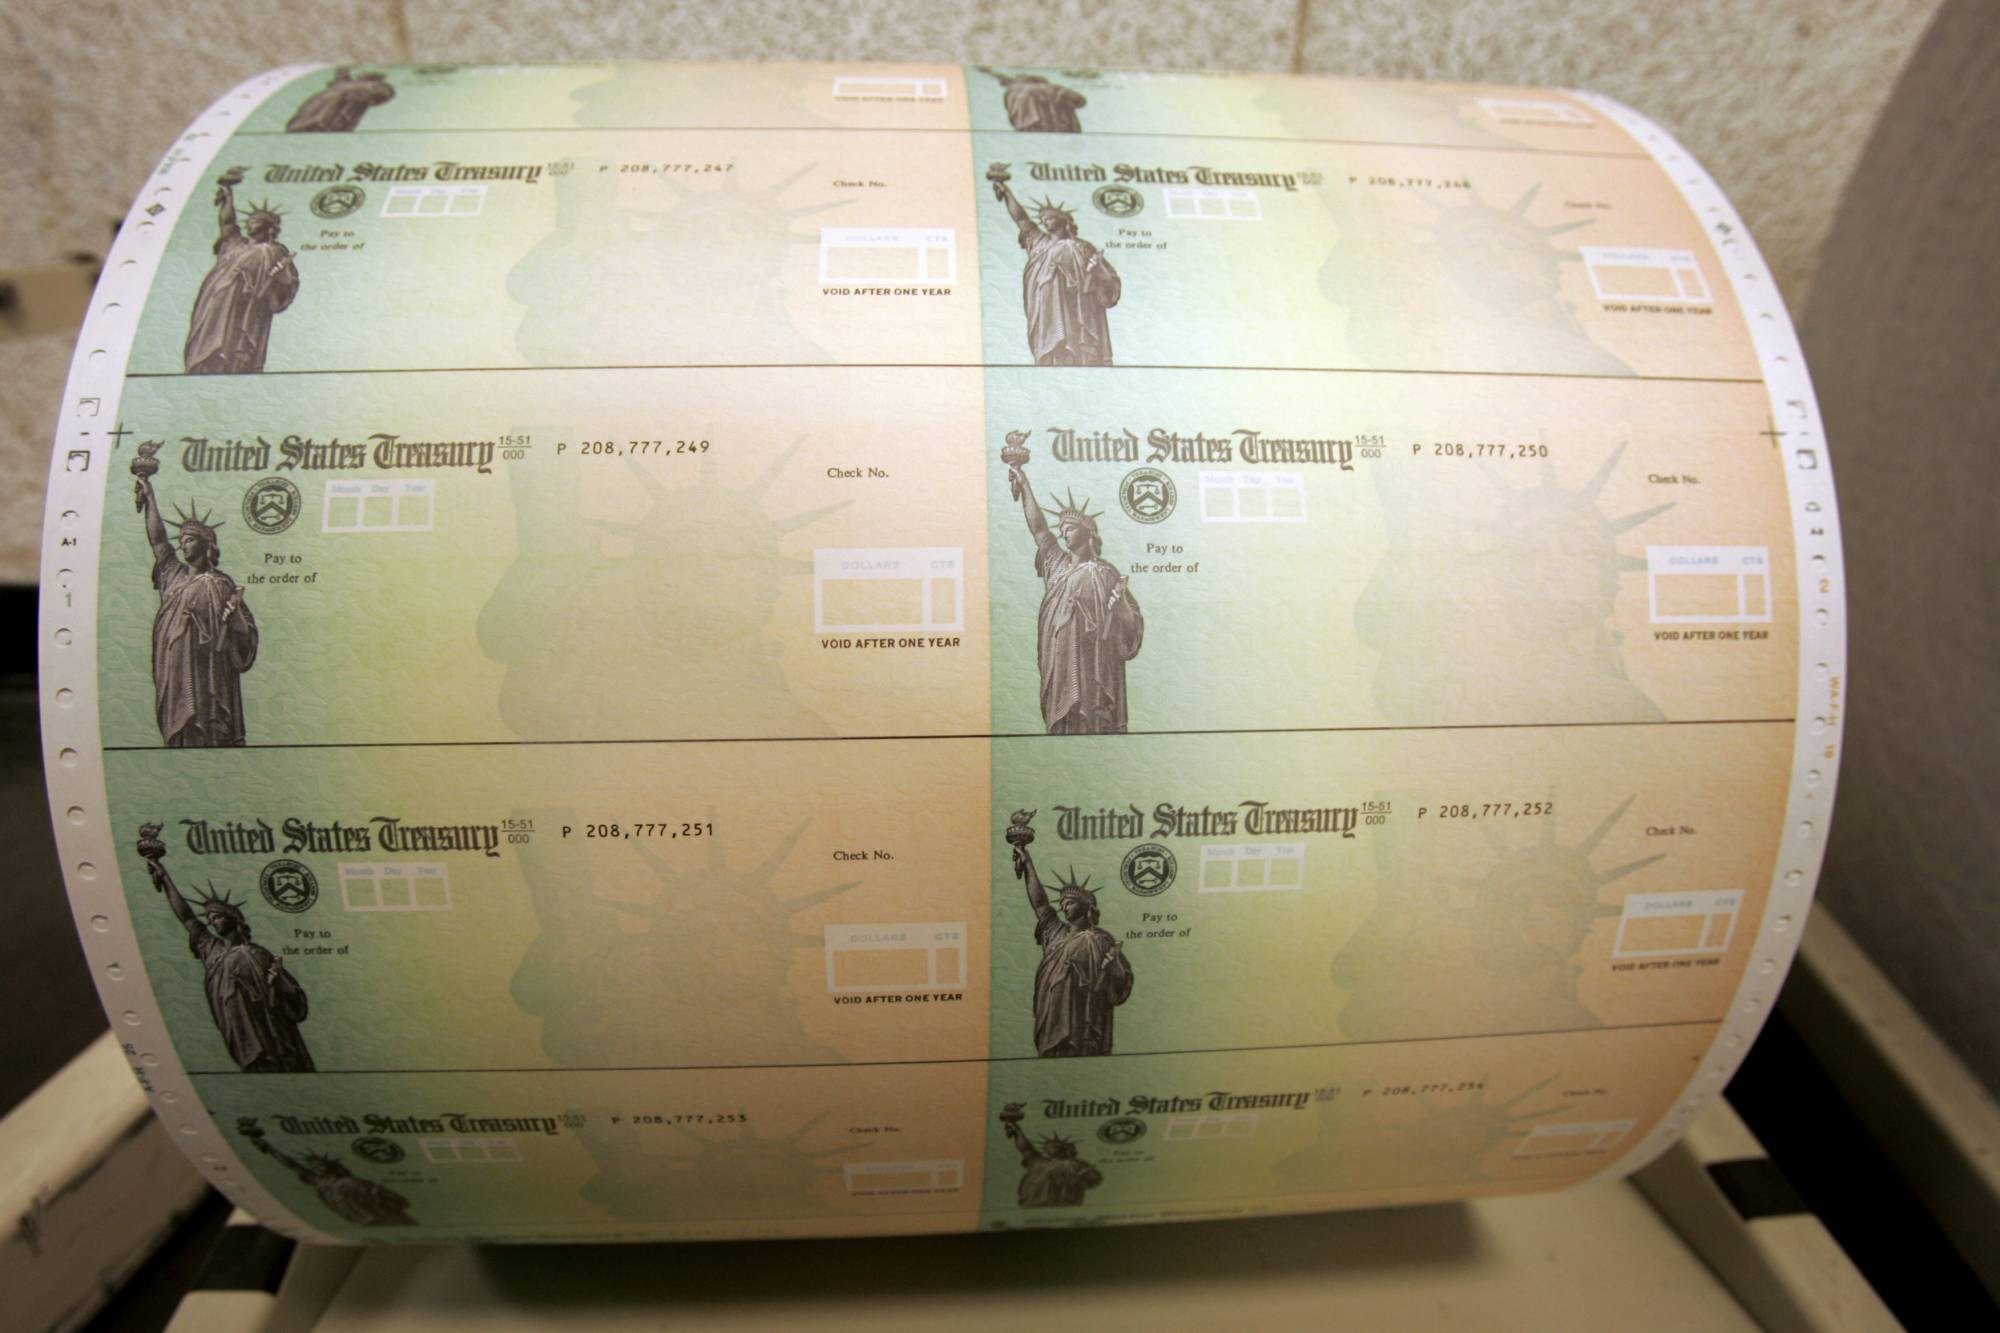 FILE - In this May 8, 2008 file photo, blank U.S. Treasury checks are seen on a roll at the Philadelphia Financial Center, which disburses payments on behalf of federal agencies, in Philadelphia. On Friday, Aug. 21, 2020, The Associated Press reported on stories circulating online incorrectly asserting that the argument that Americans rely on the United States Postal Service for Social Security benefits is invalid because the Social Security Administration stopped mailing paper checks in 2013. The SSA encourages Americans to create digital accounts and receive their benefits electronically, but hundreds of thousands of users still count on the USPS to get their checks every month. (AP Photo/Matt Rourke, File)